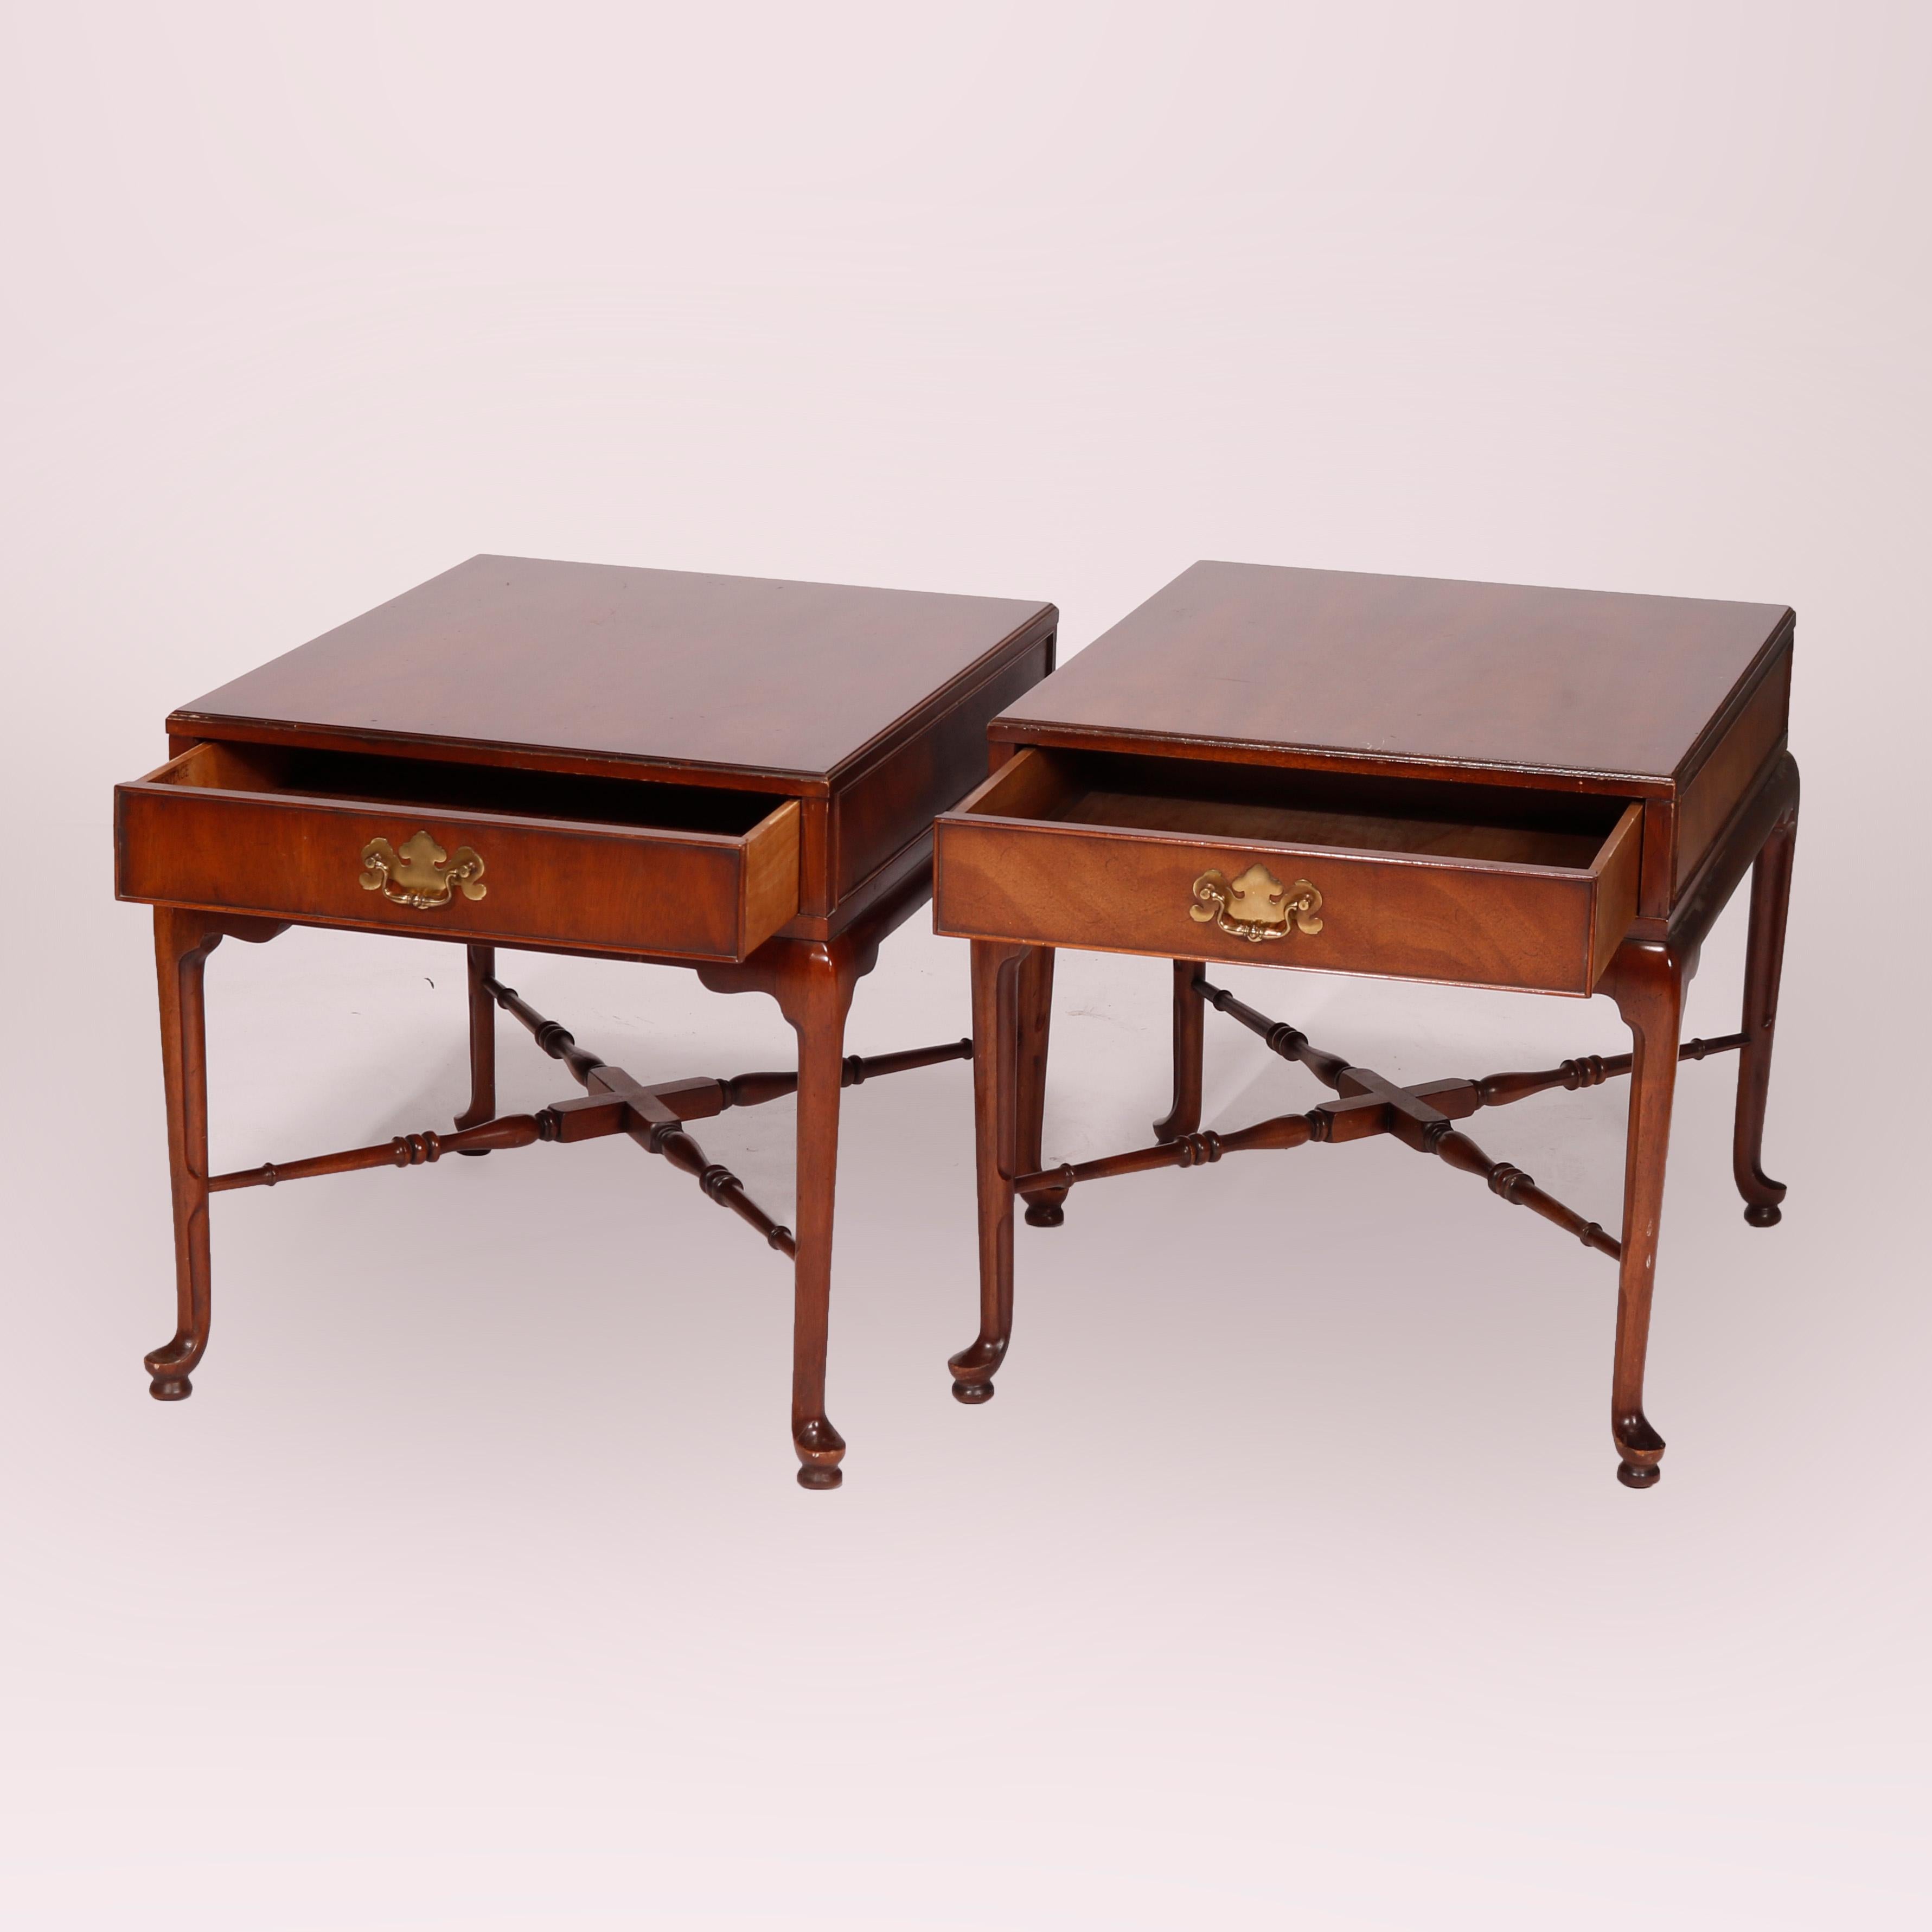 A matching pair of Queen Anne style side stands by Heritage of the Signers Collection and retailed by B. Altman & Co. of New York offer walnut construction with cases having single drawers, riased on cabriole legs with pad feet and turned